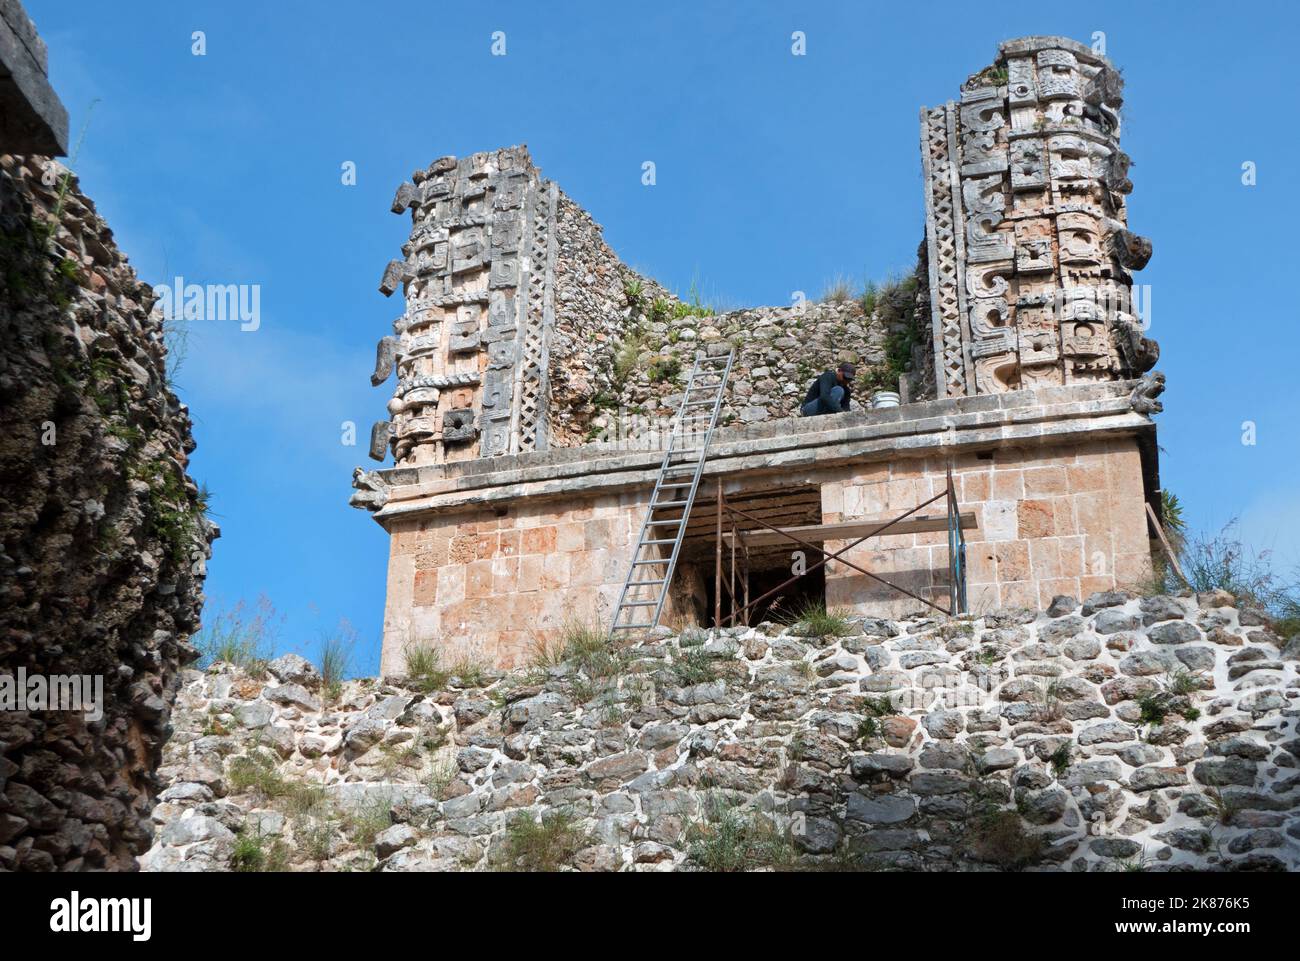 Man working at the Maya archeological site of Uxmal in Yucatan, Mexico. Mayan ruins with The Nunnery Quadrangle as old building under maintenance and Stock Photo